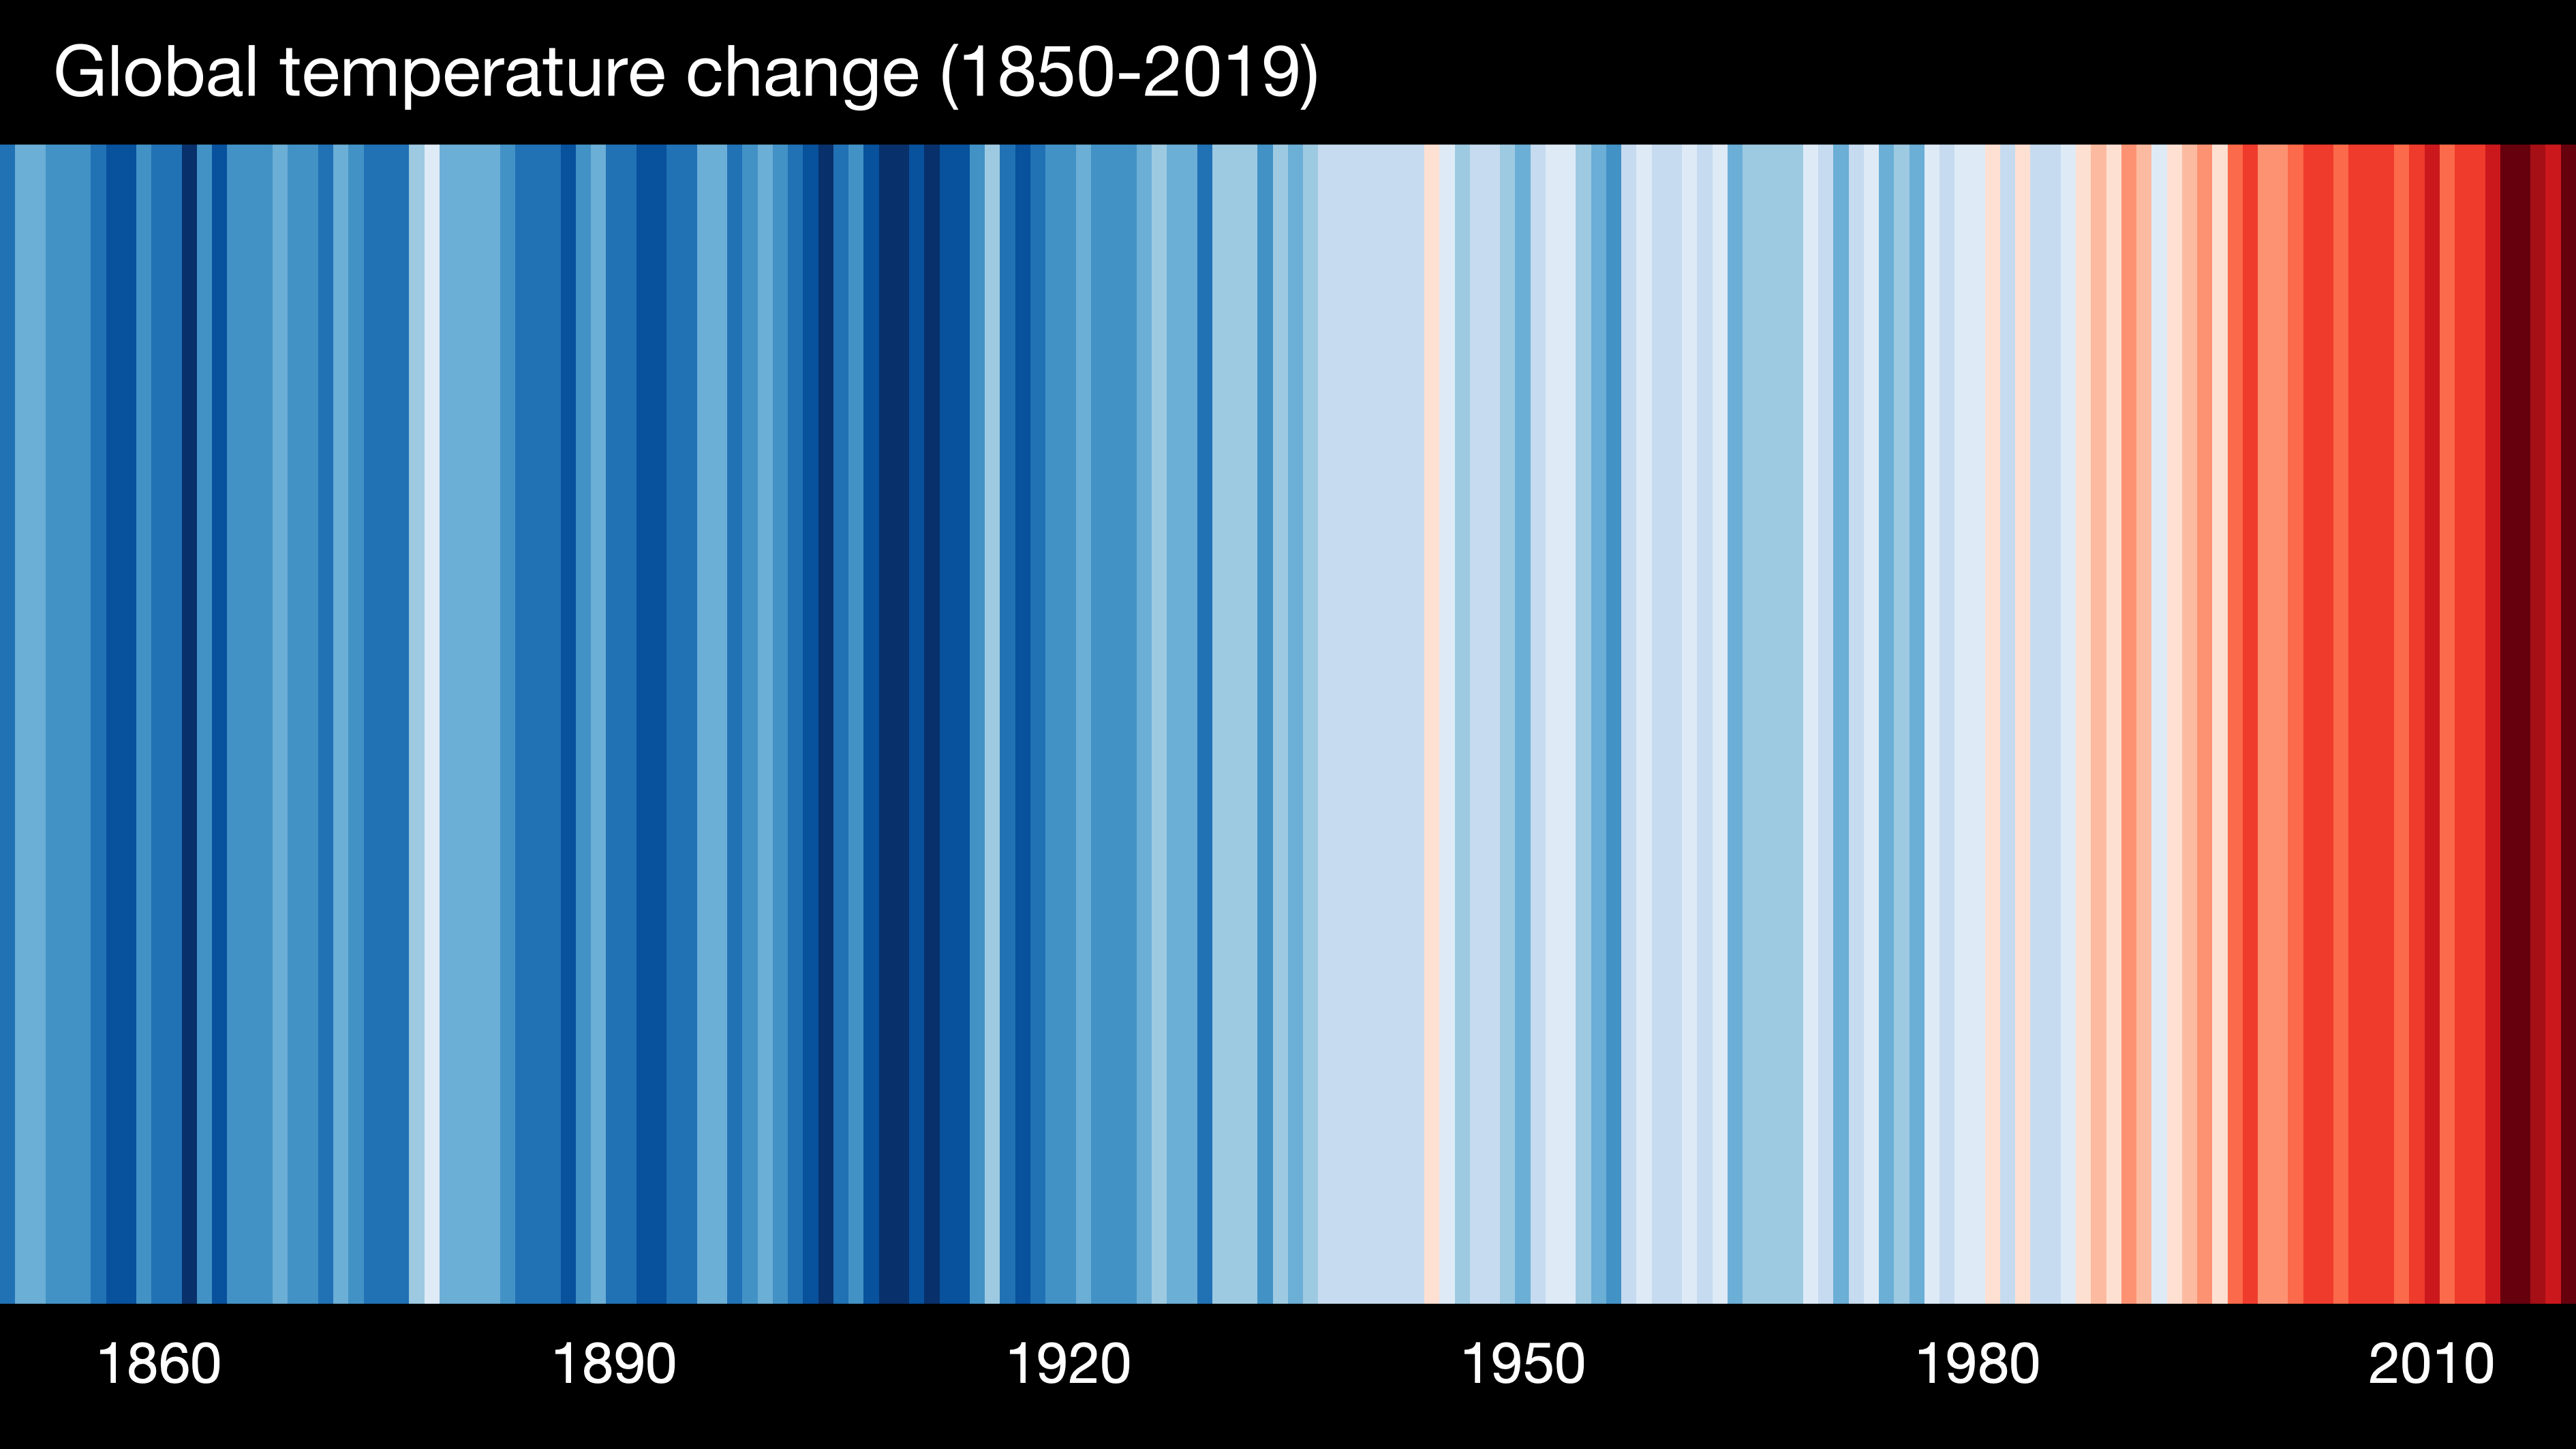 Warming Stripes for GLOBE from 1850-2019